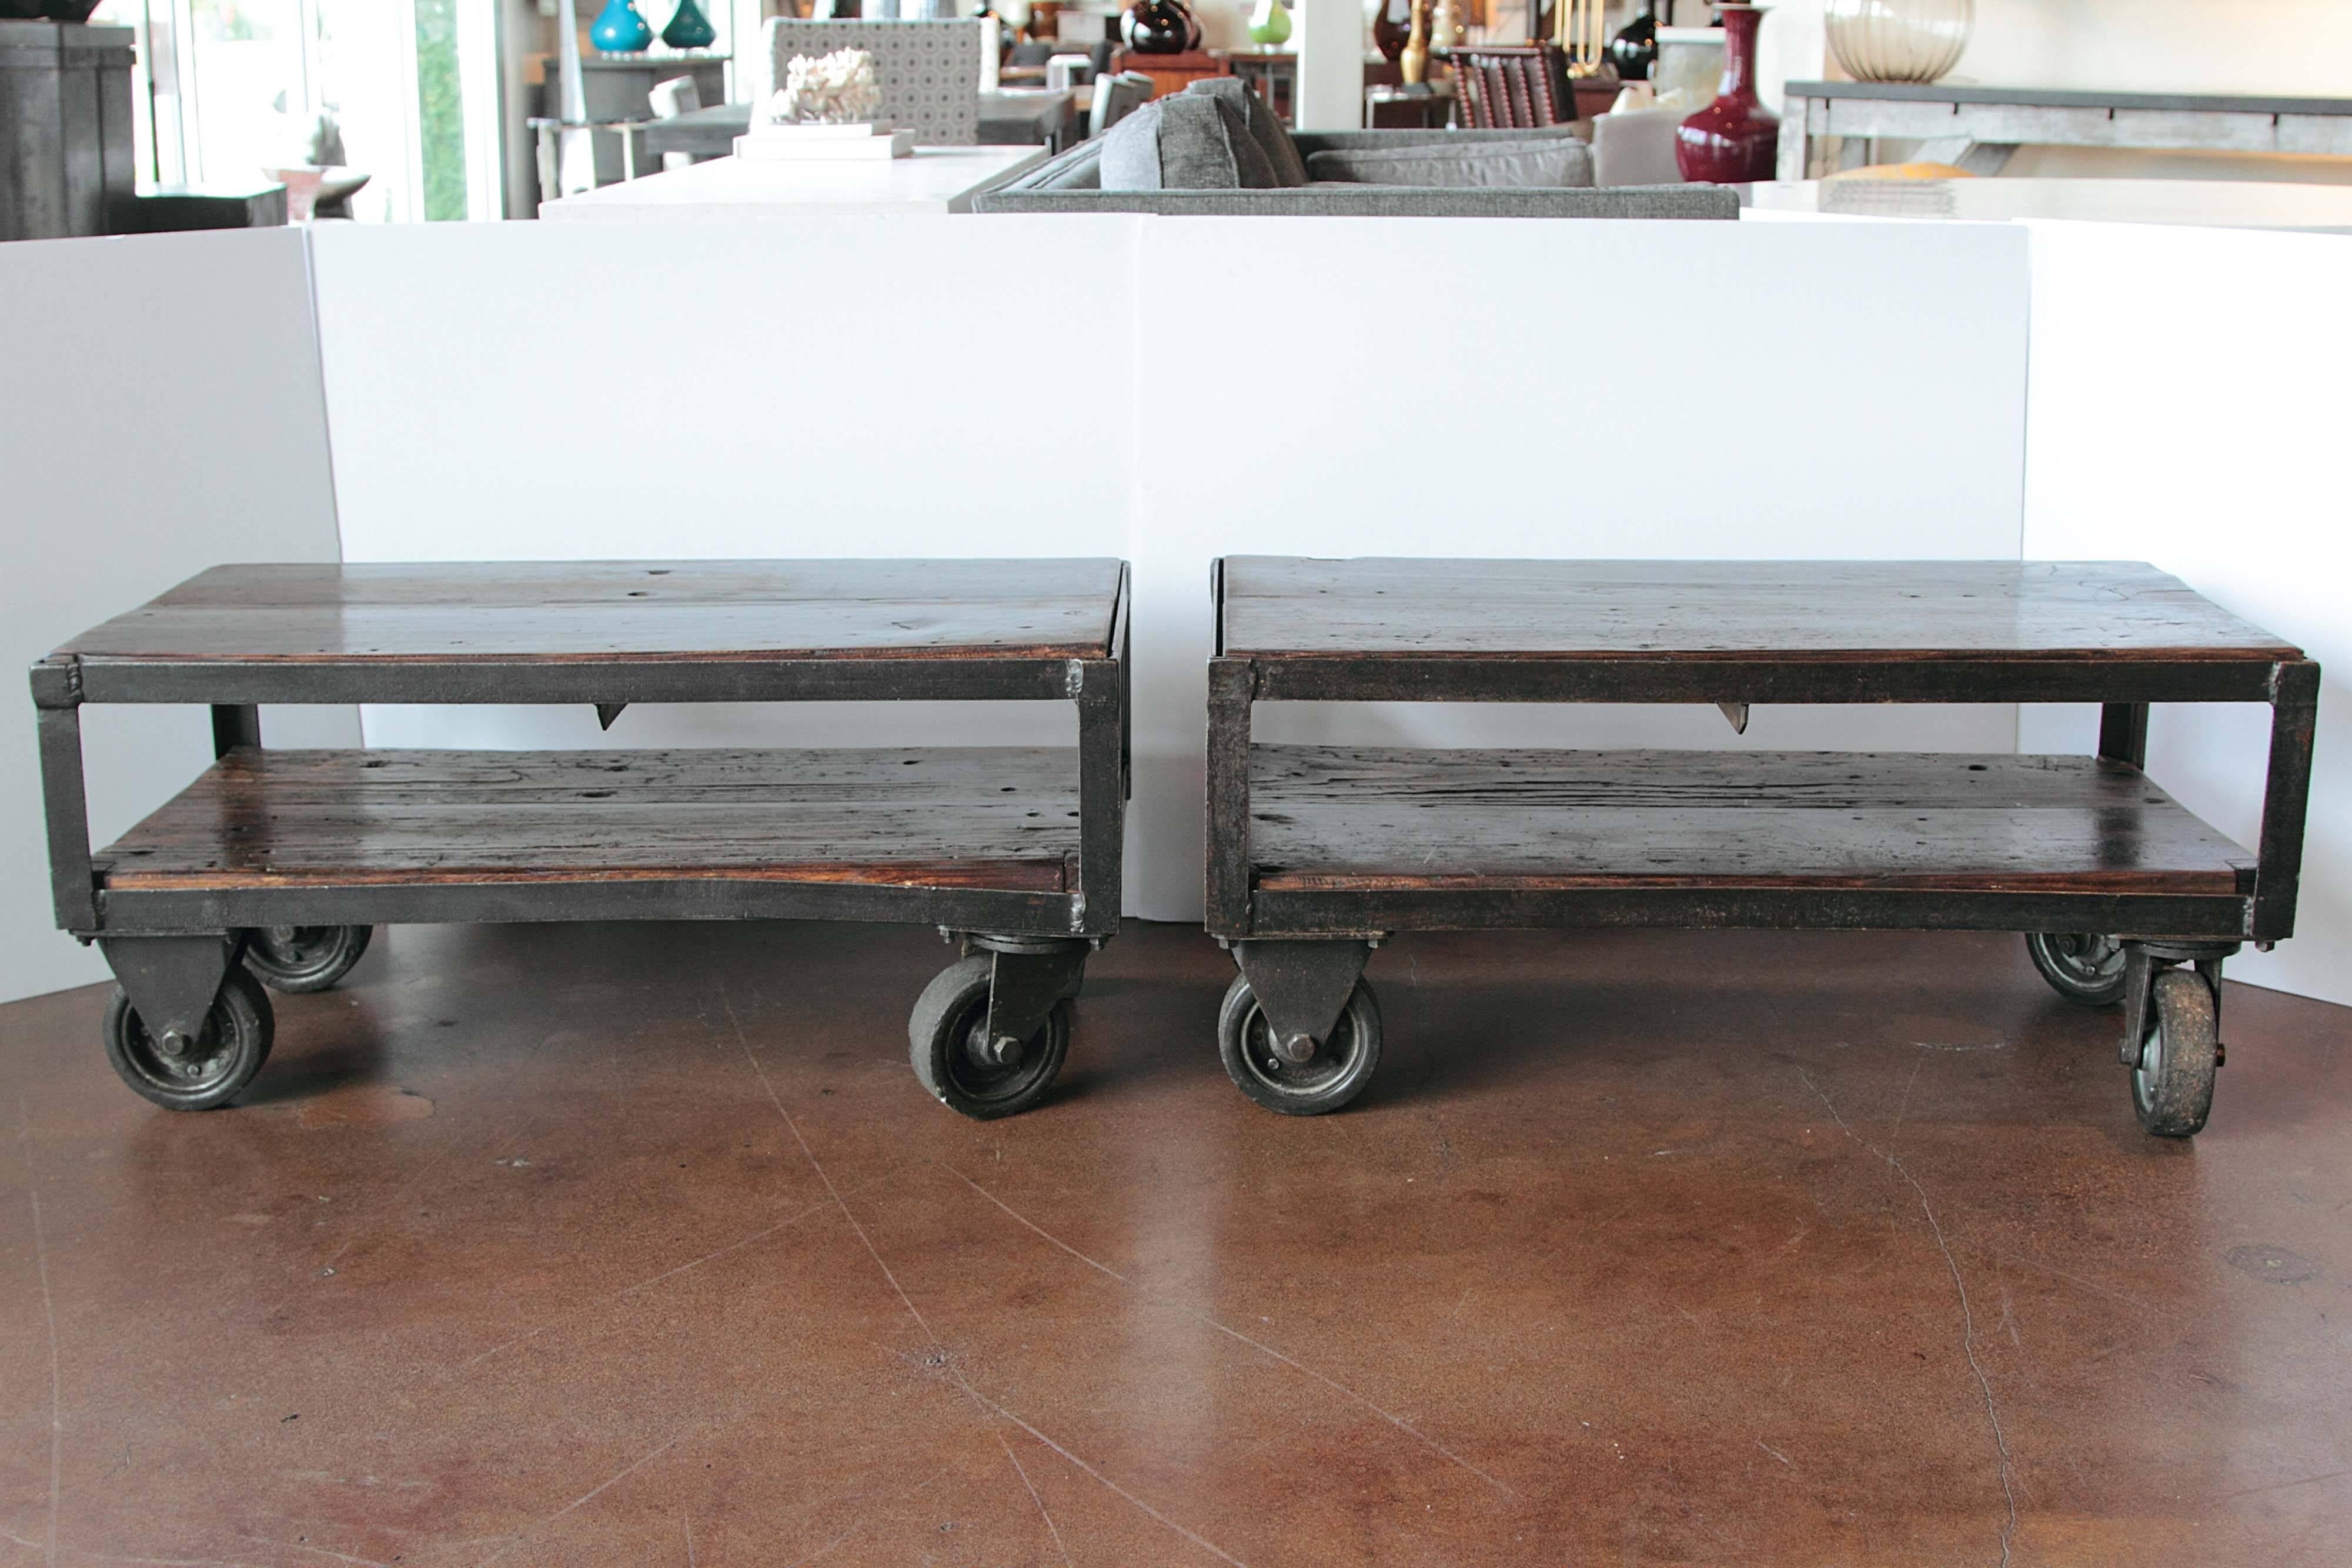 Industrial French factory cart table, circa 1940s.
Dark brown pine with iron base.
360 degree Industrial caster wheels attached to bottom.
Inner cart storage space. Inner cart measurement: 7